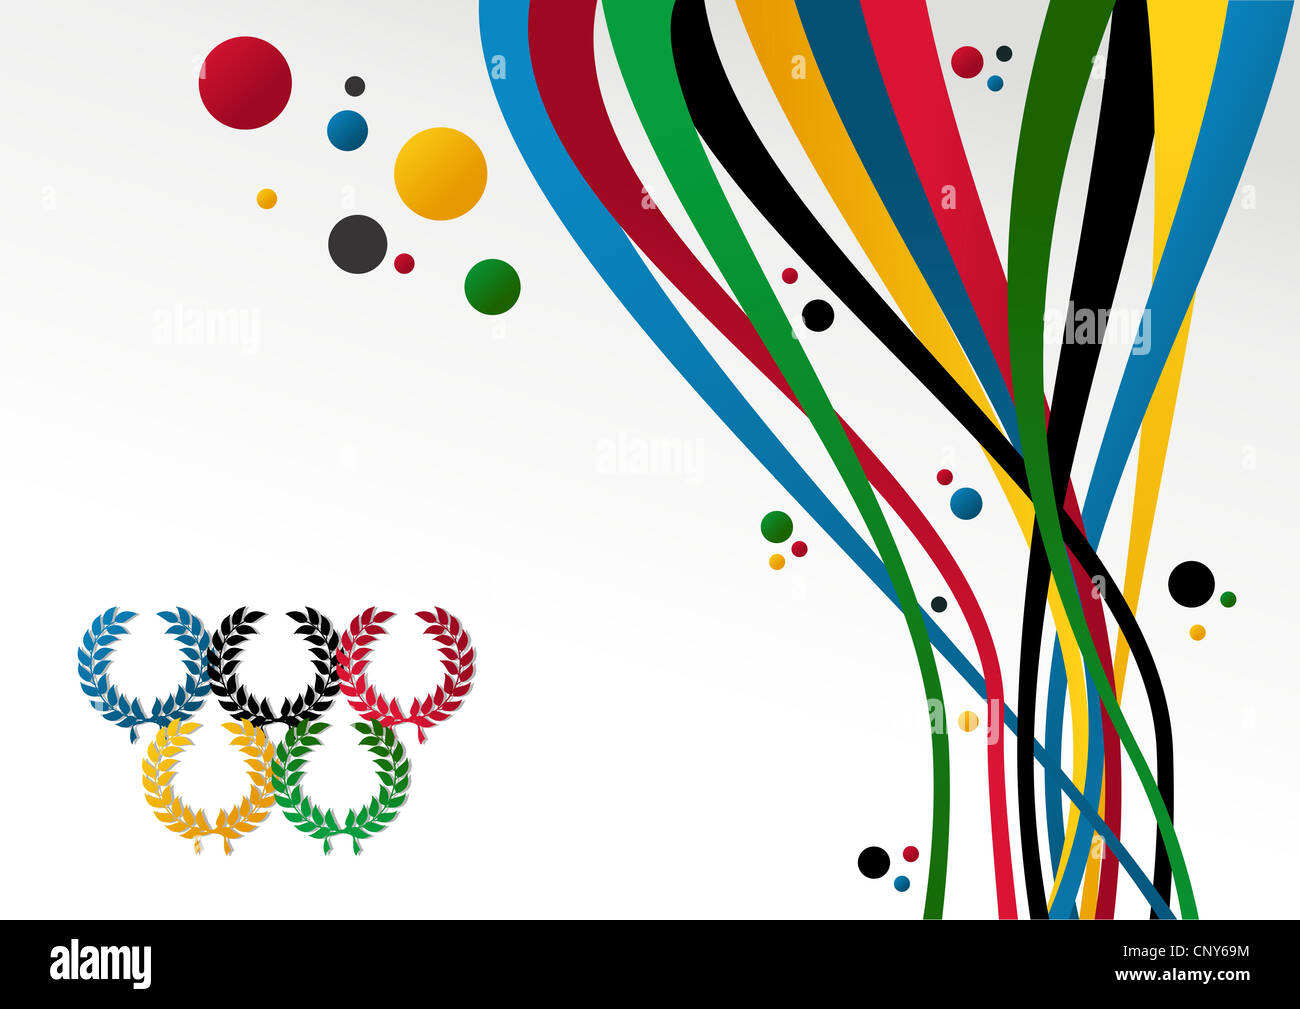 Olympic Games laurel wreath, ribbons and circles over white background. Vector file layered for easy manipulation and customisation. Stock Photo